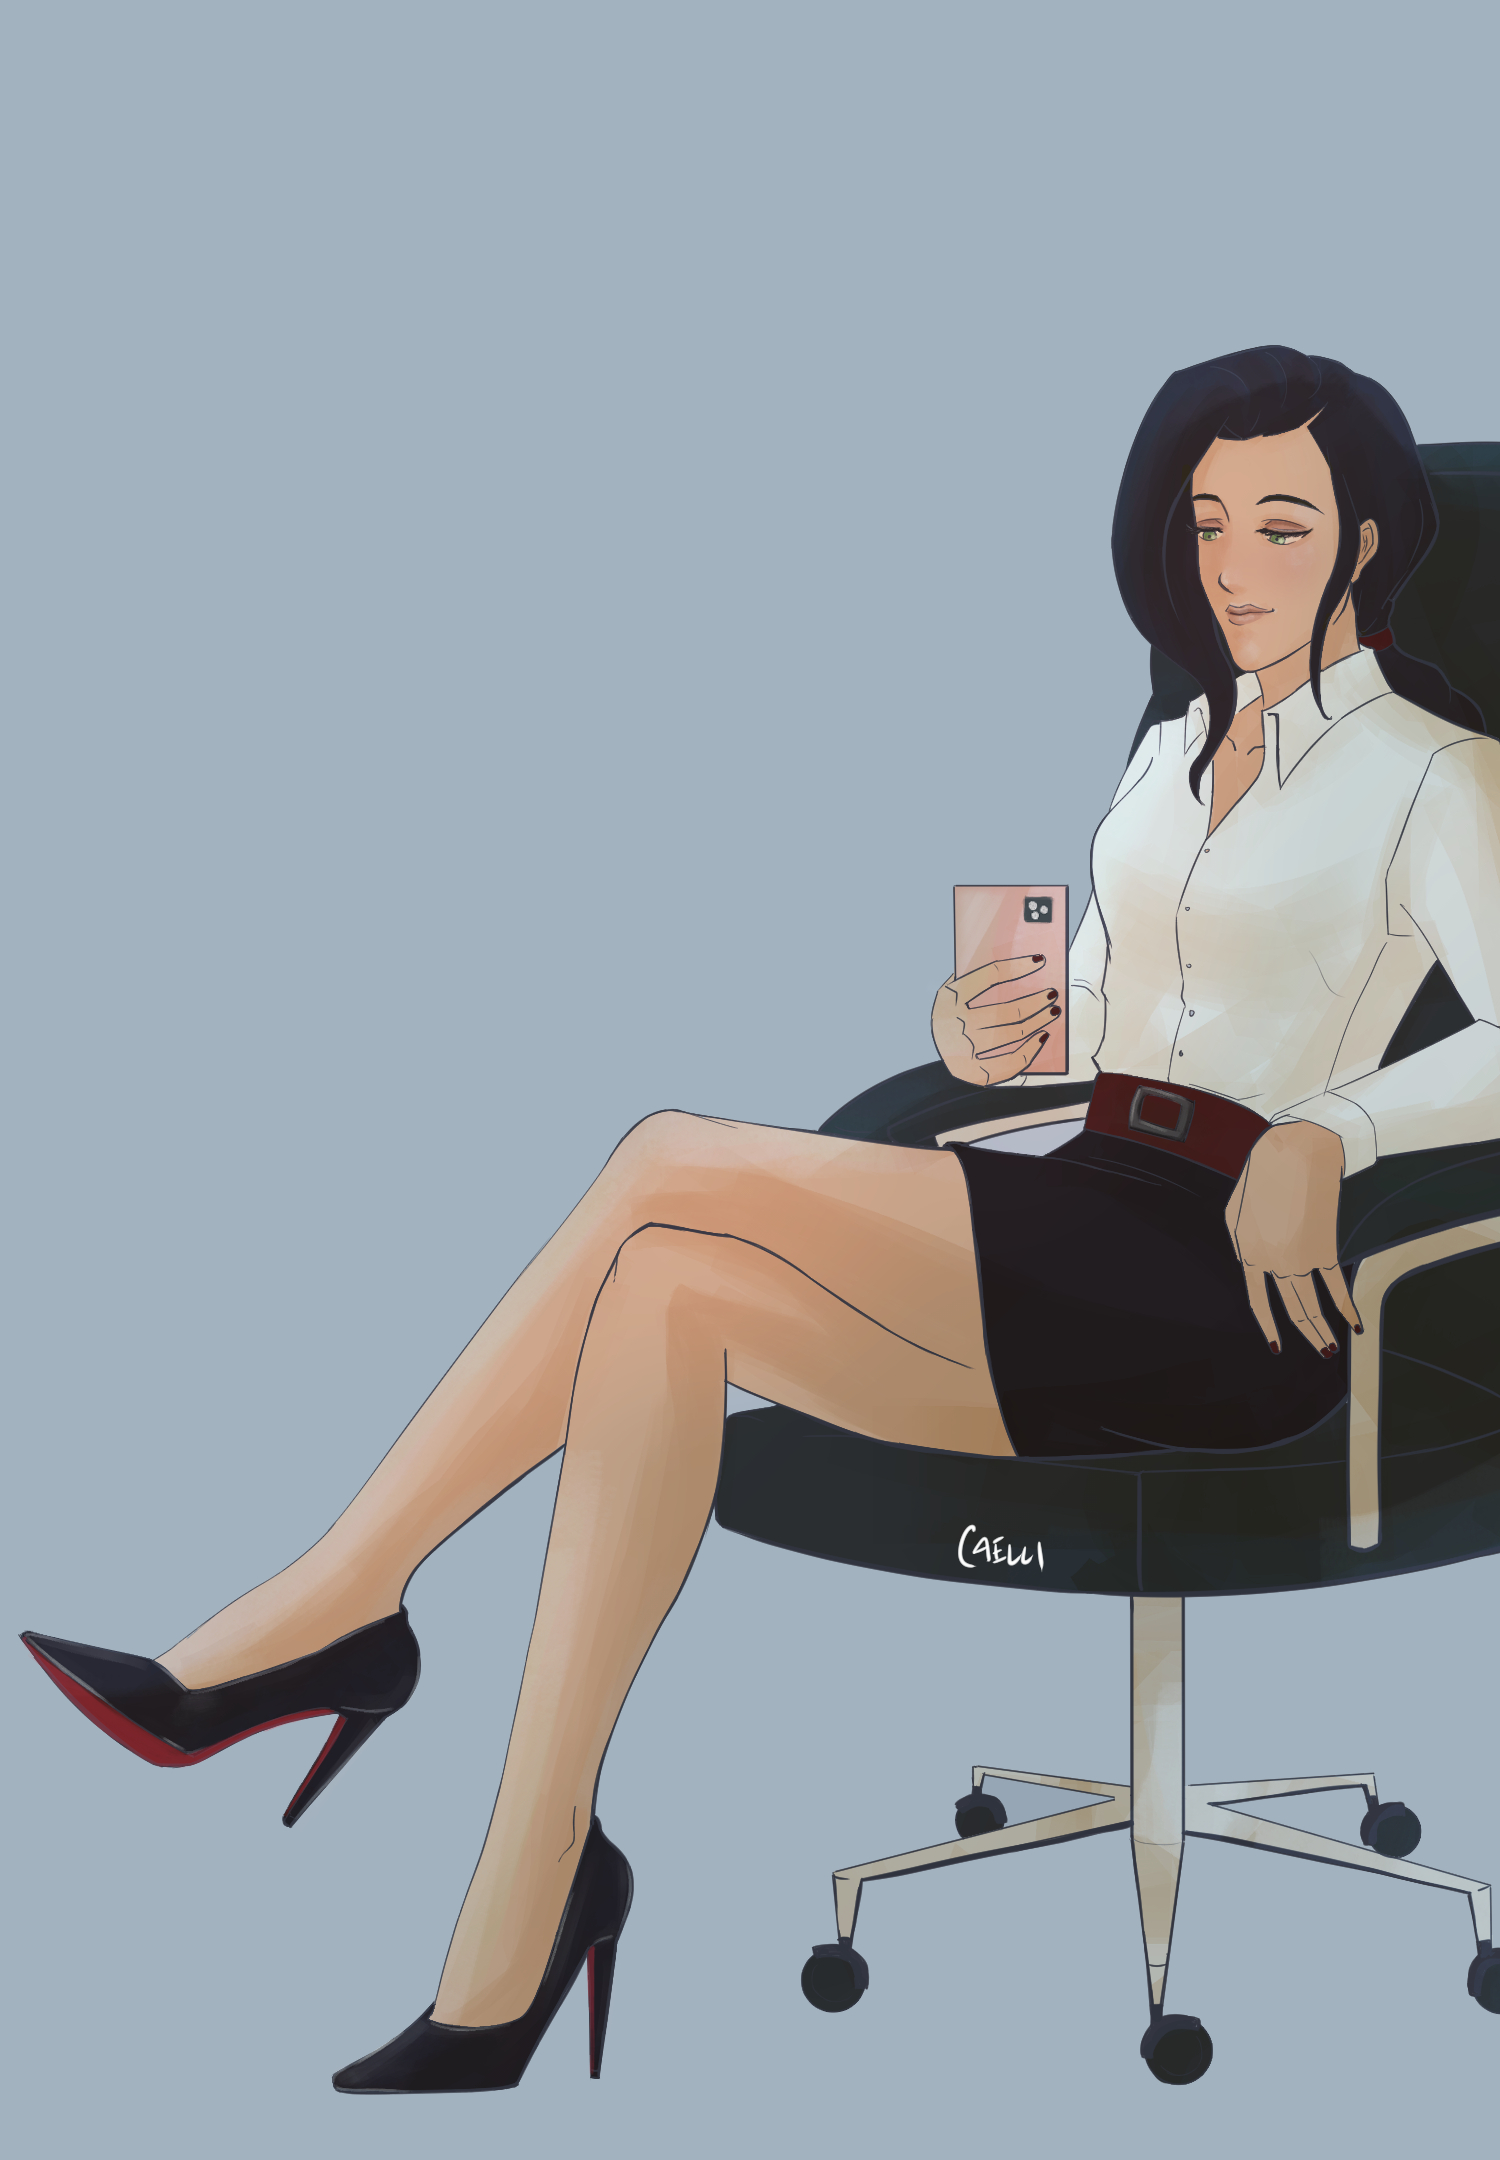 Asami sitting in her office chair showing off her legs and red bottom heels.